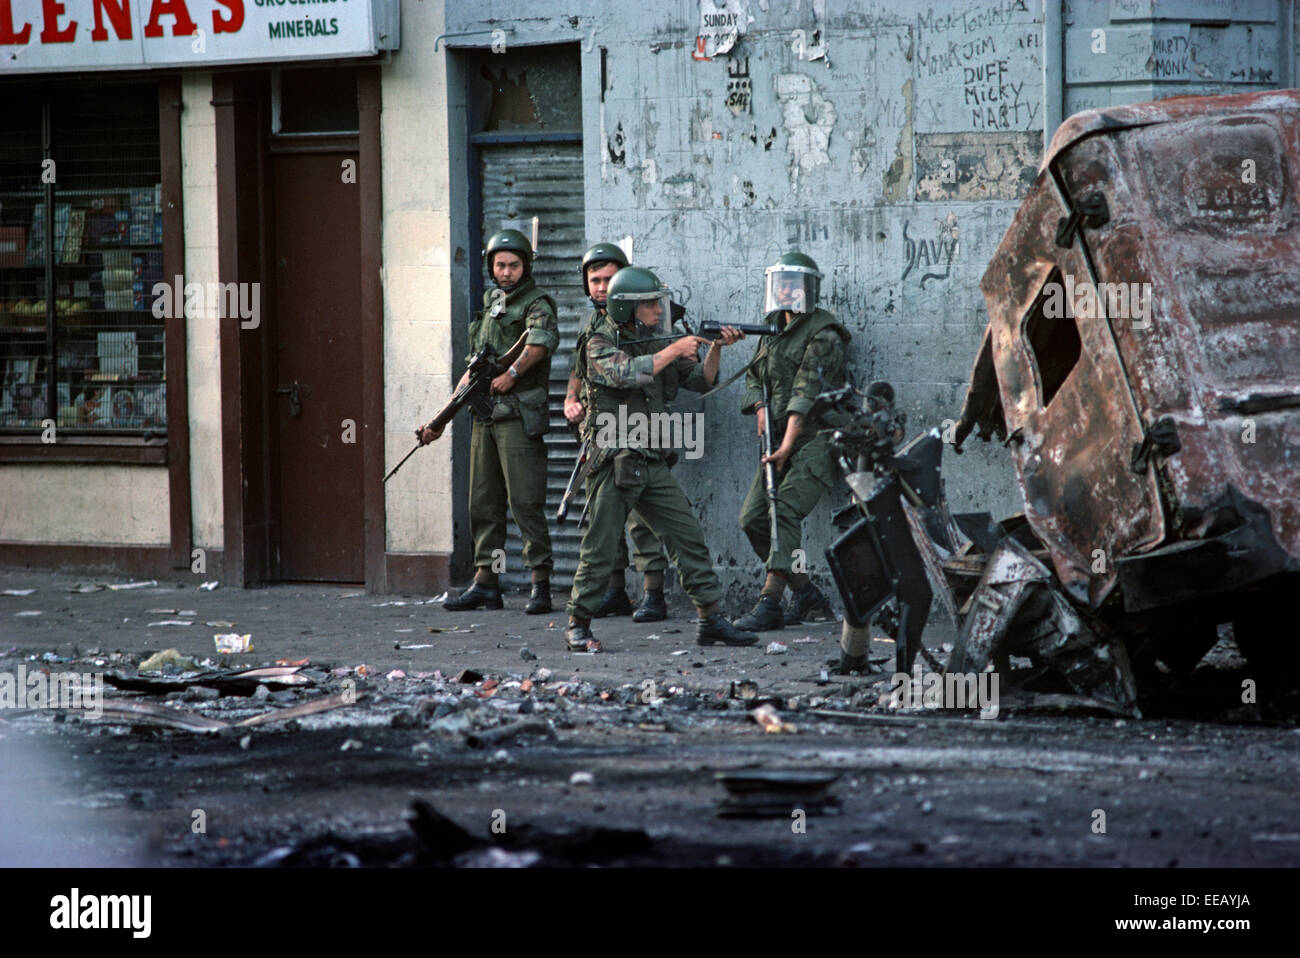 BELFAST, NORTHERN IRELAND - AUGUST 1976, British Army Troops during Rioting on the Falls Road, West Belfast, The Troubles, Northern Ireland. Stock Photo